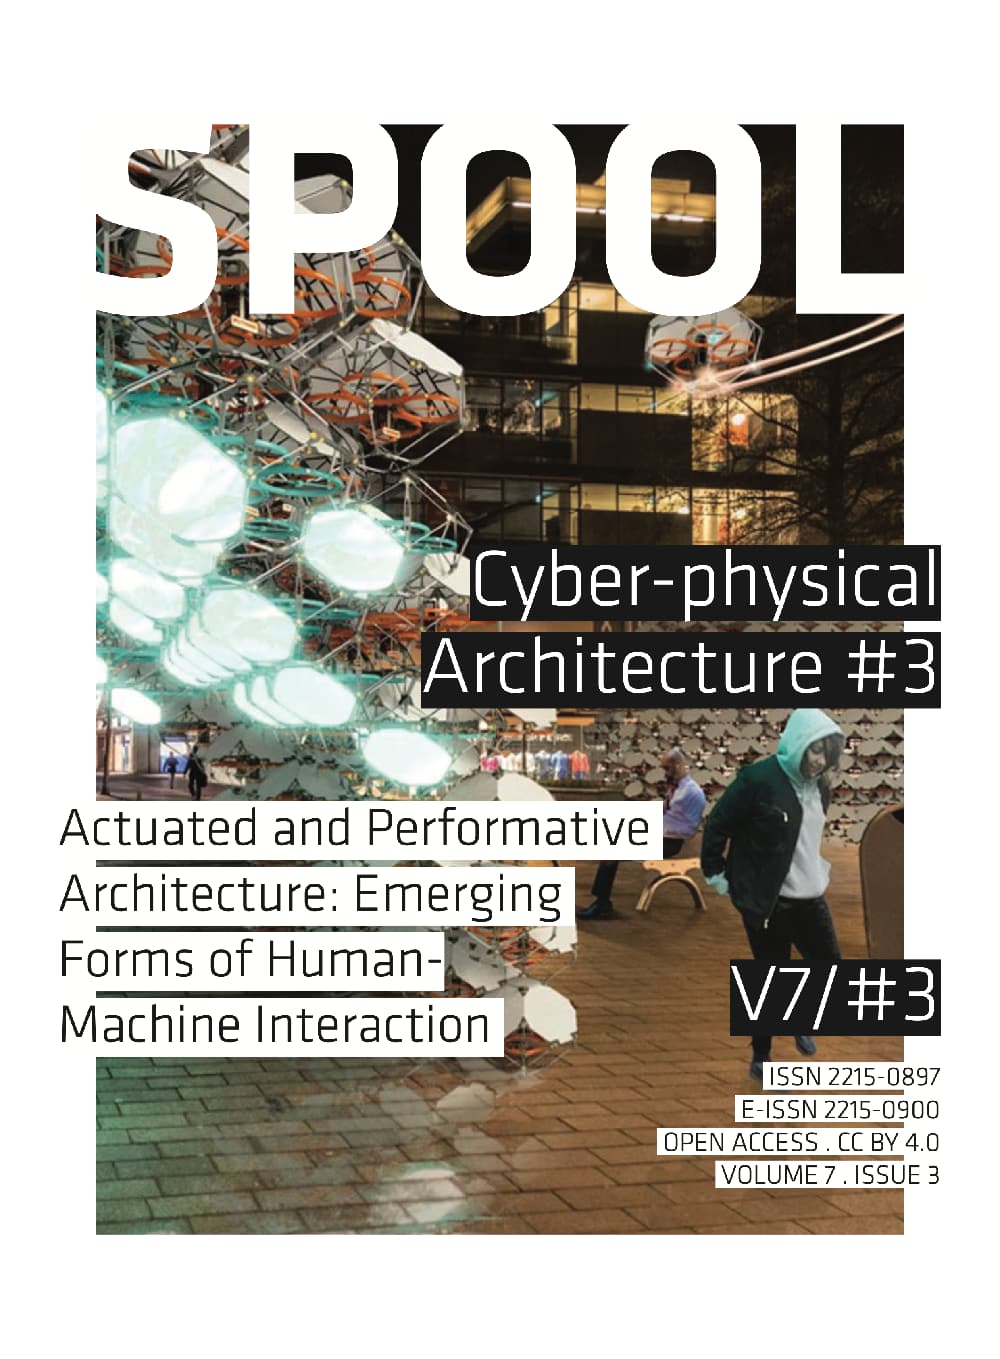 Cyber-physical Architecture #3